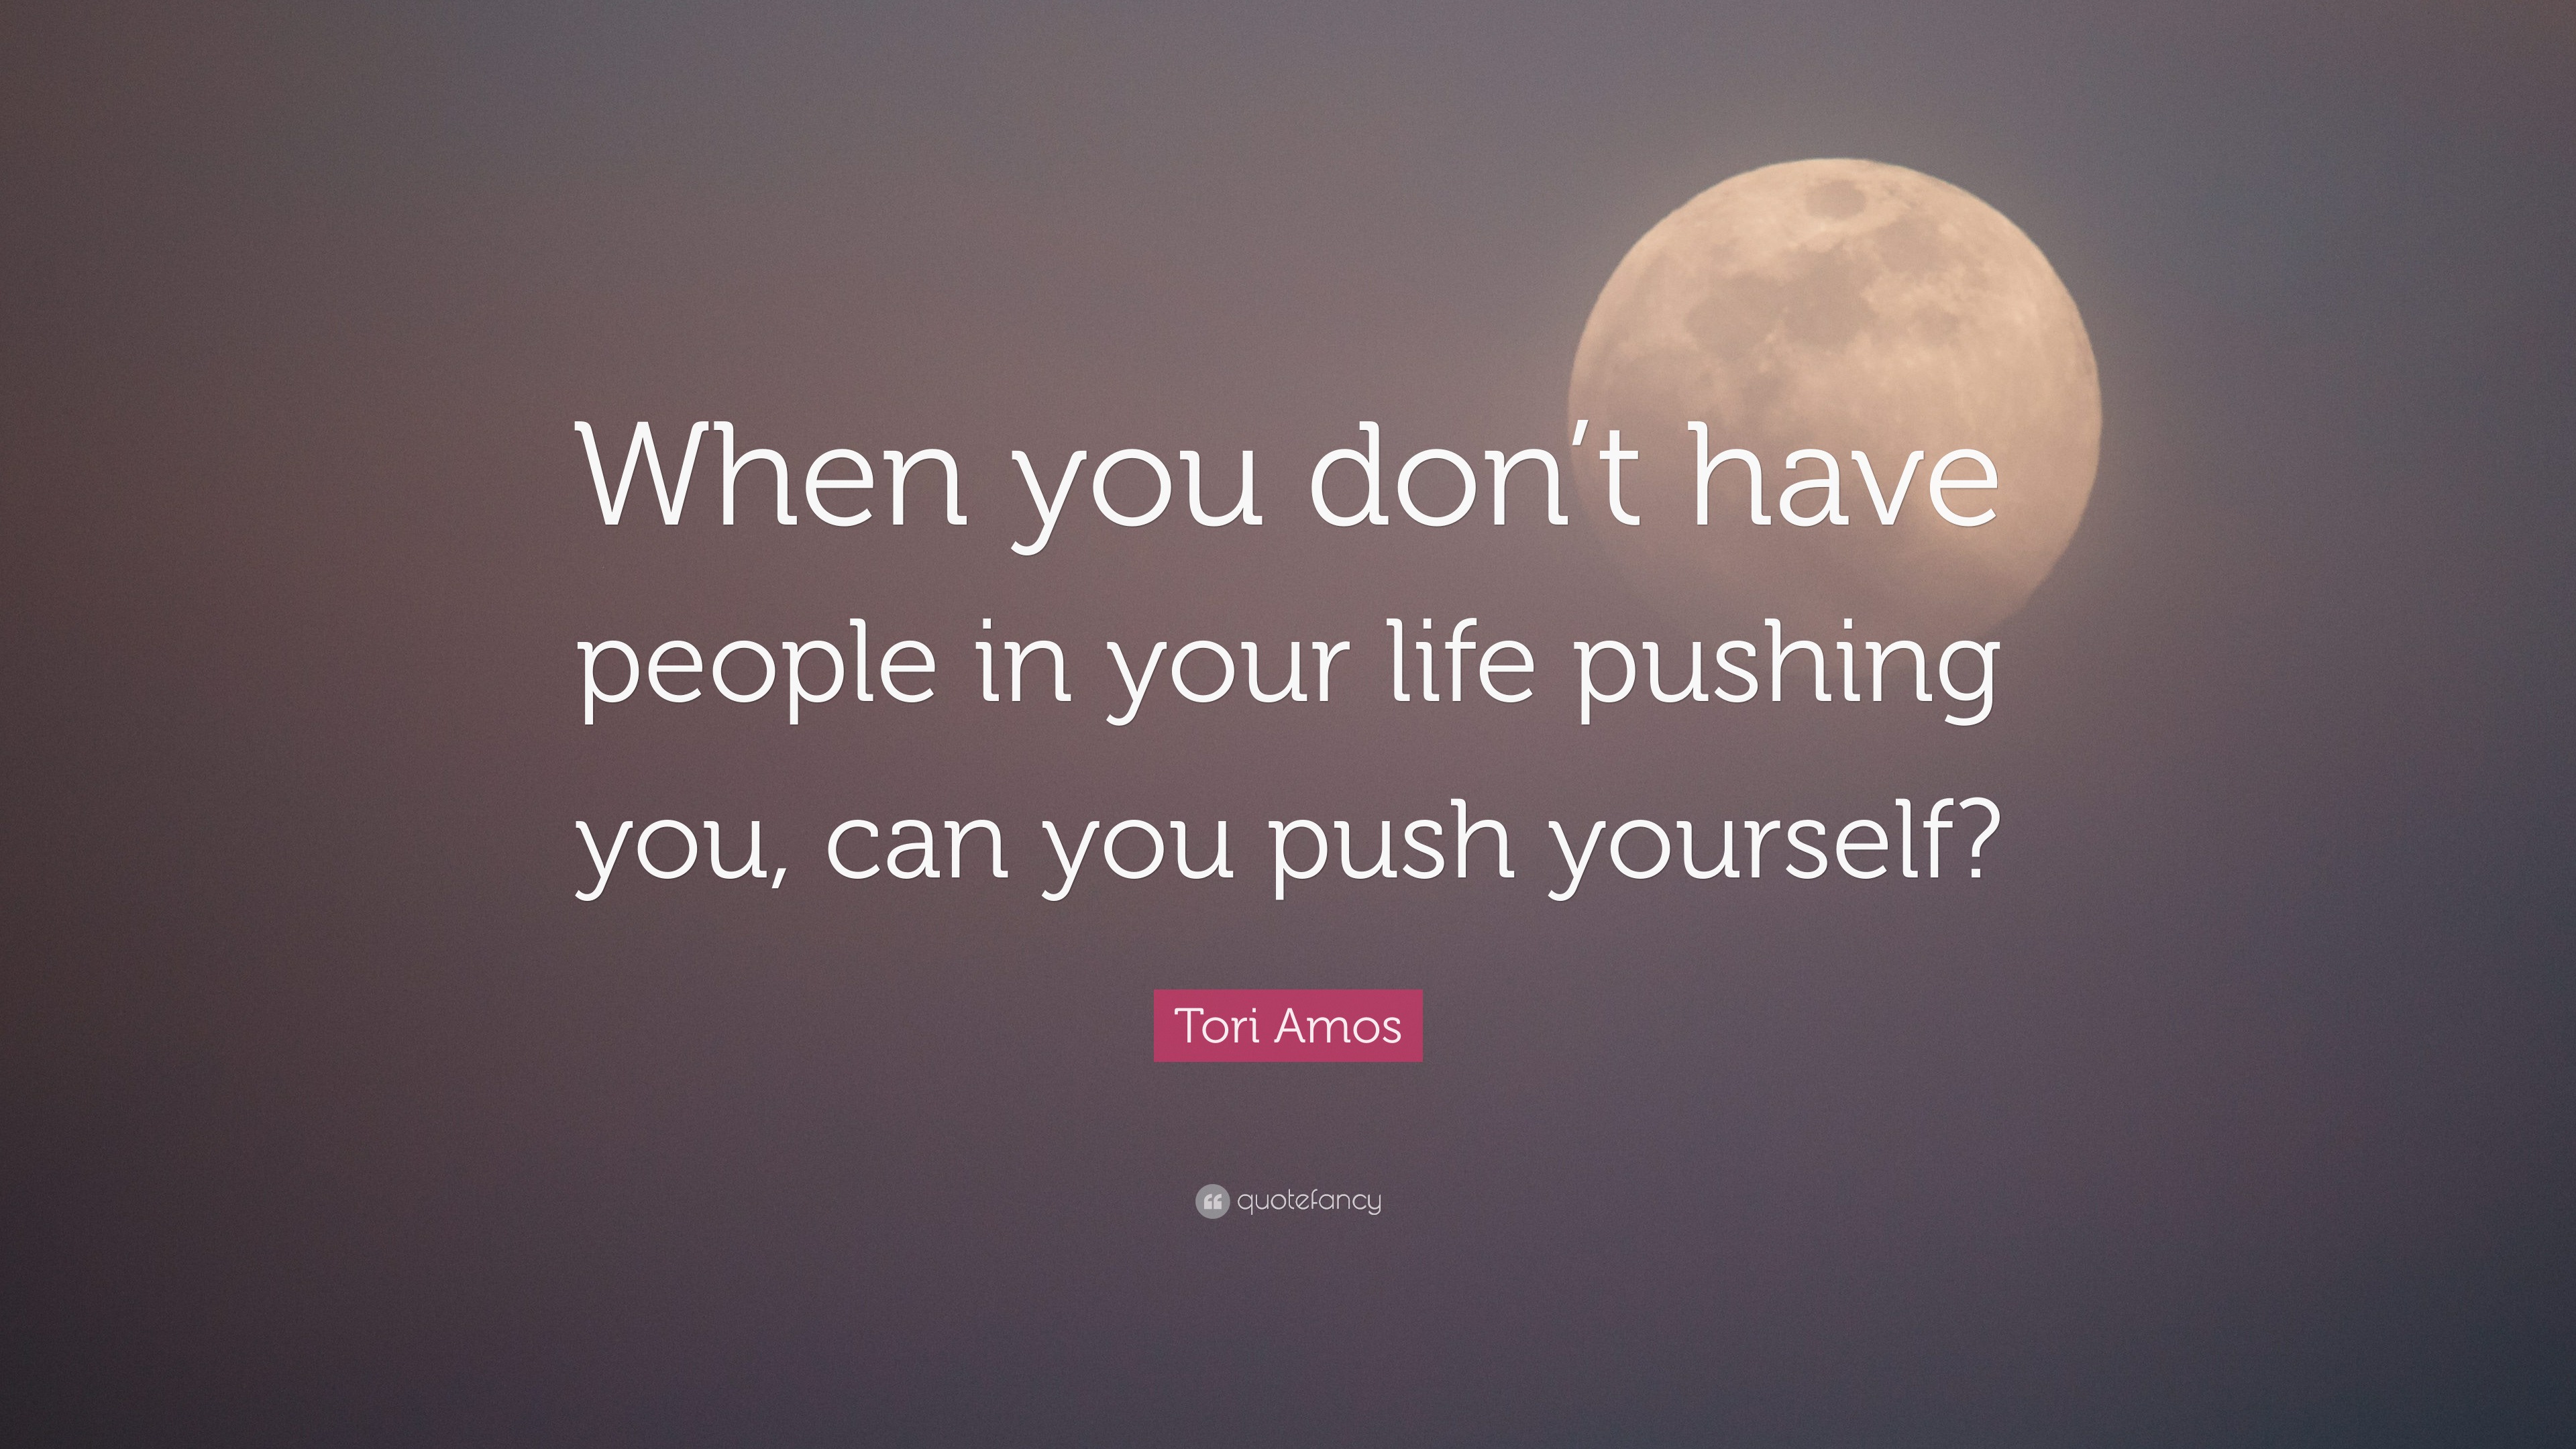 Tori Amos Quote When You Don T Have People In Your Life Pushing You Can You